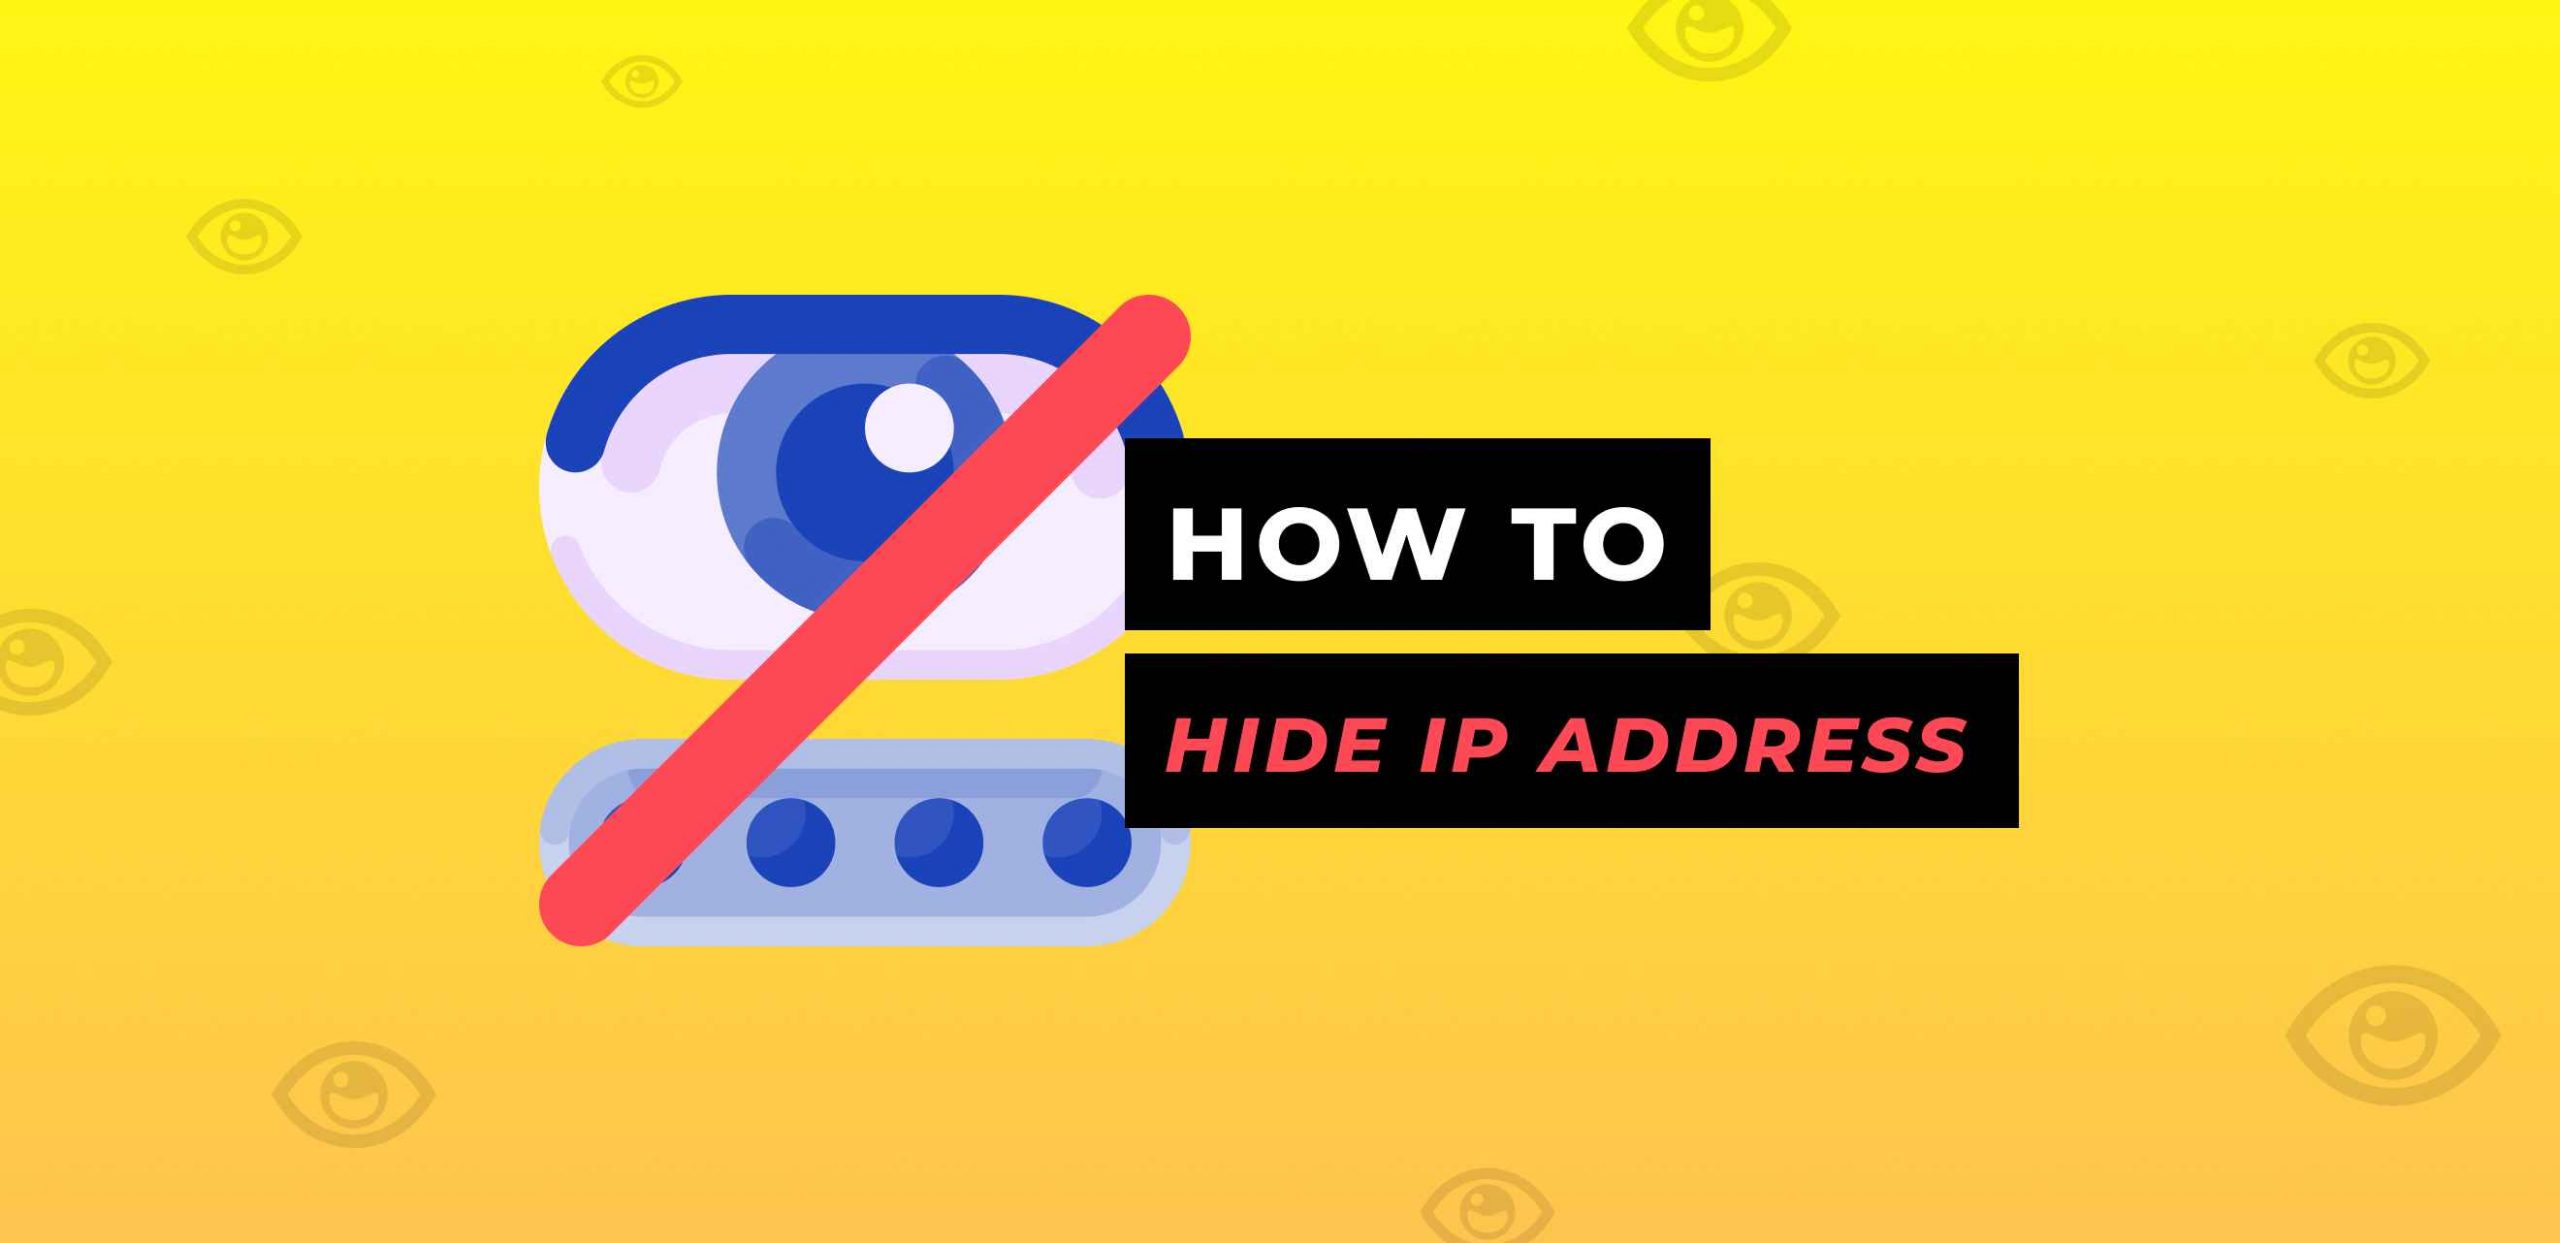 How to Hide Your IP Address (and Why You Might Want To)